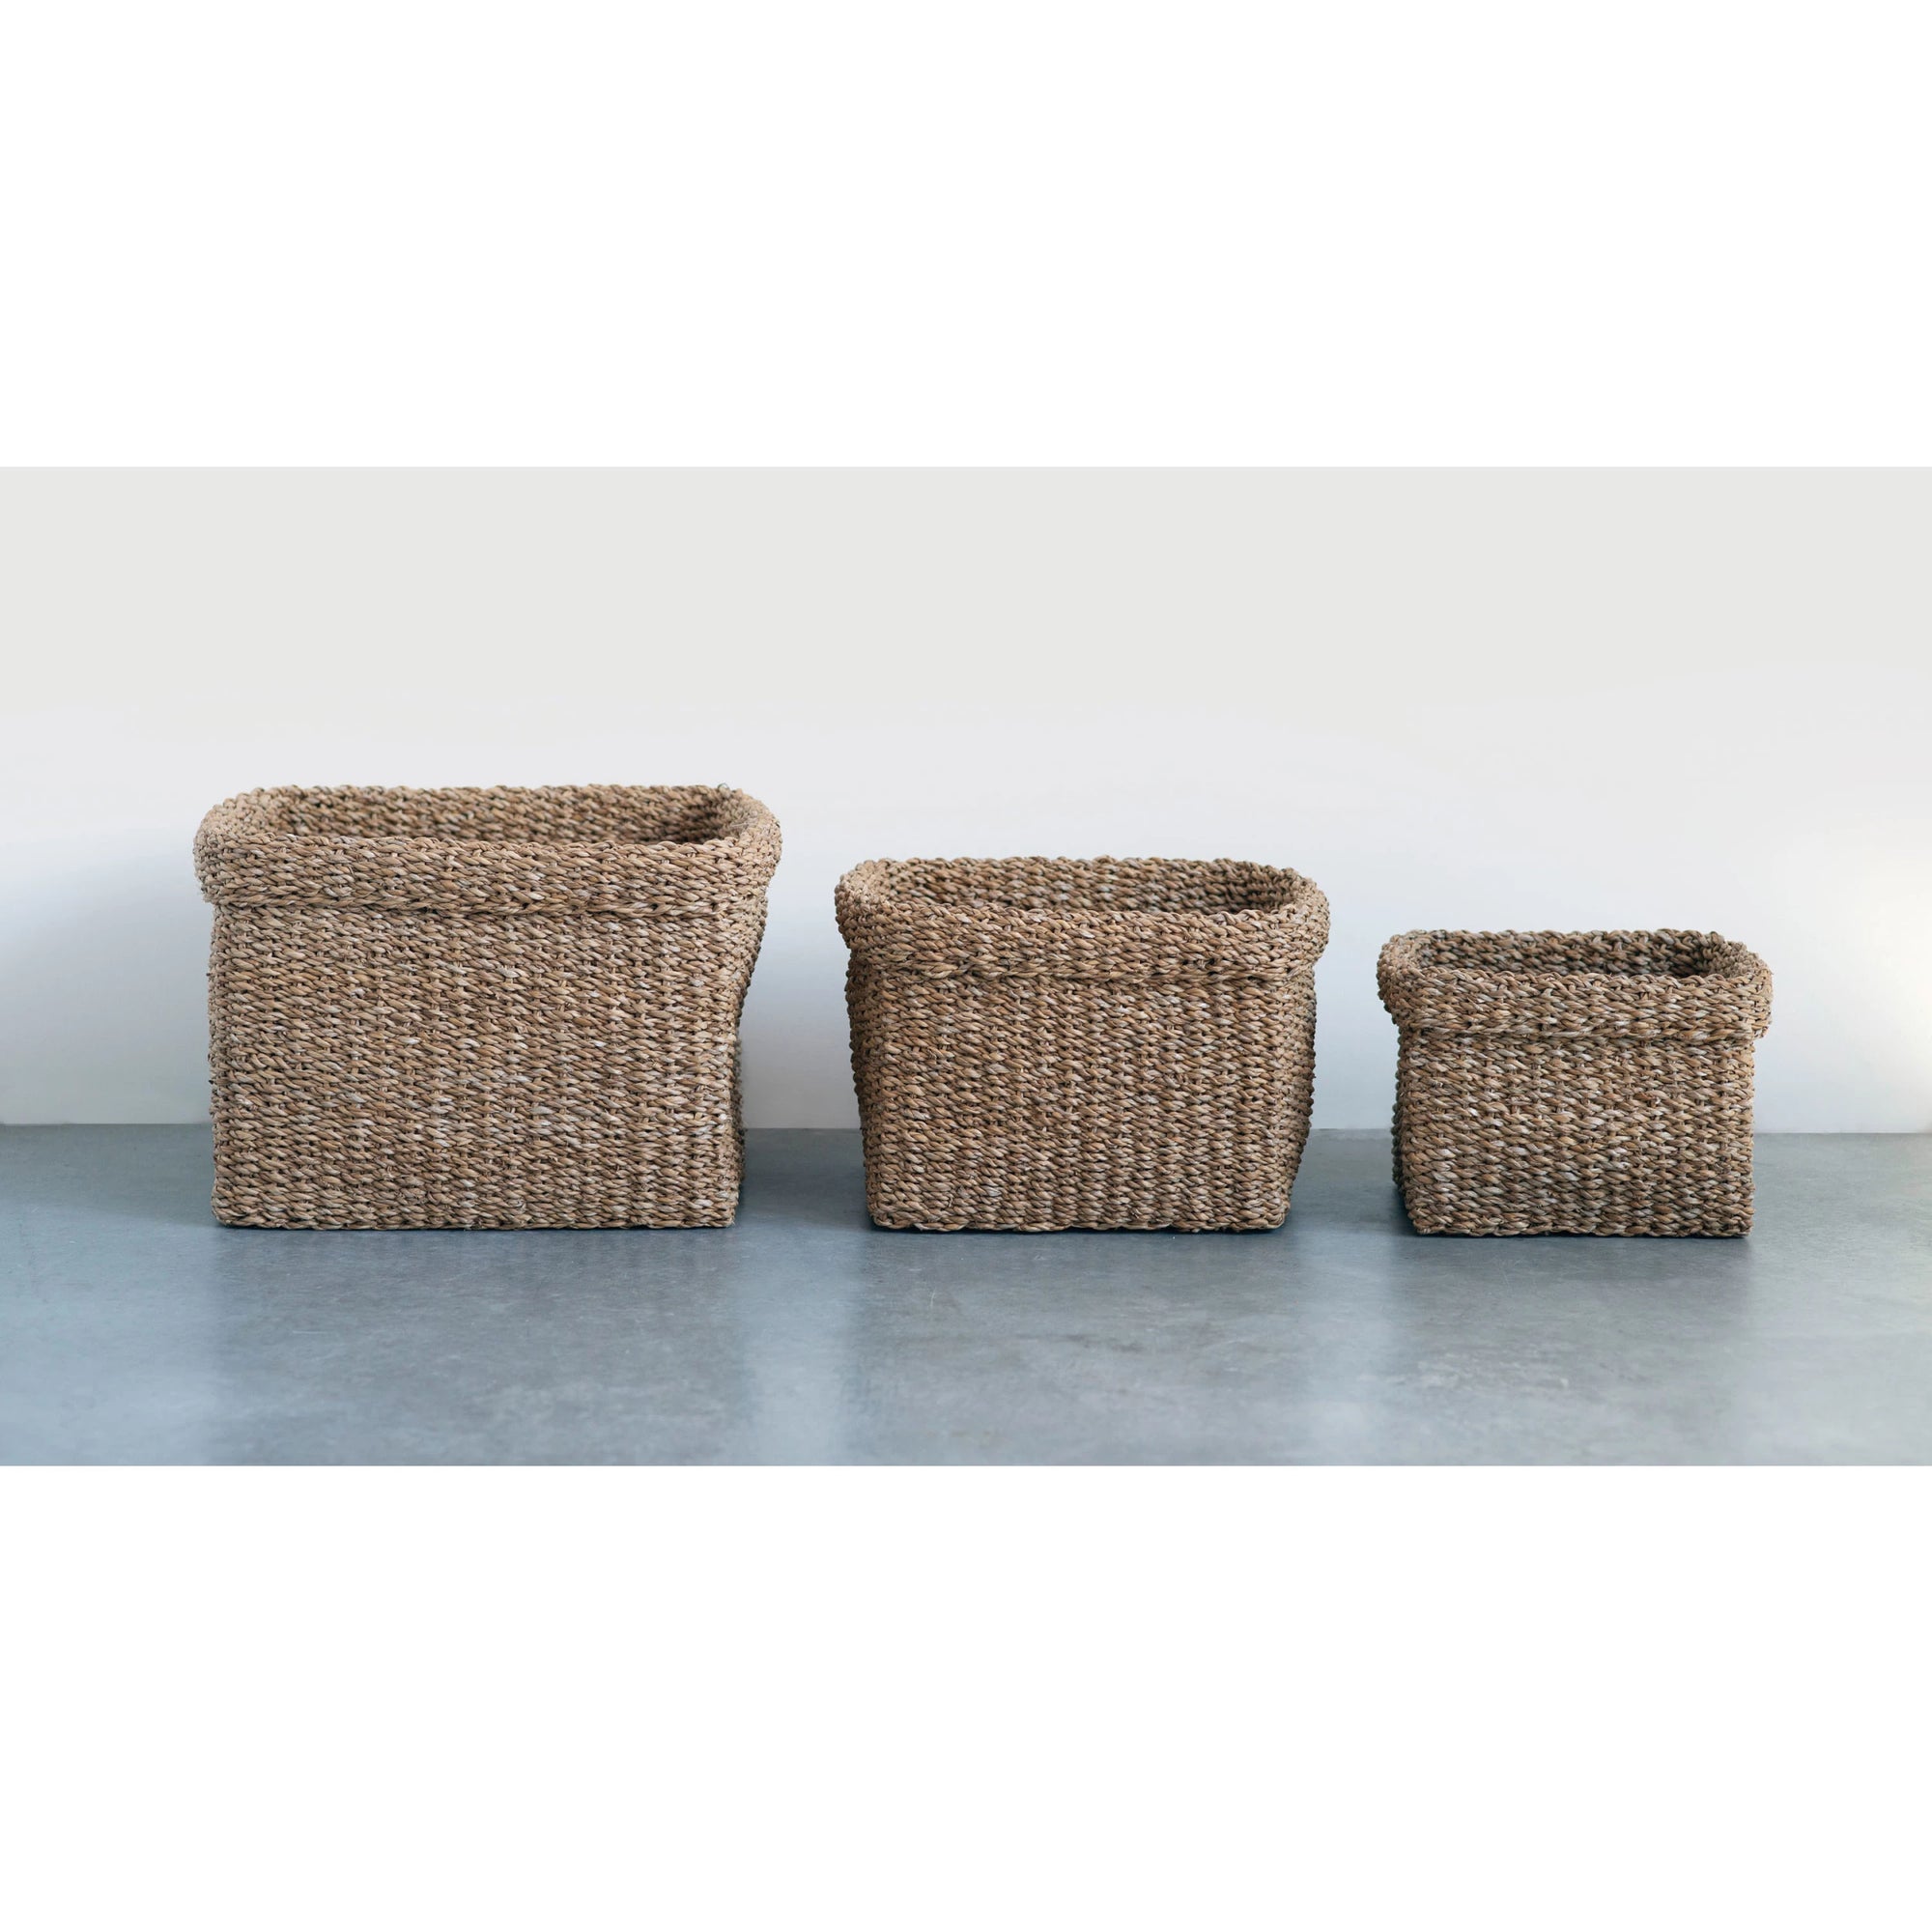 Hand woven natural seagrass baskets in a coordinating series of small, medium, and large. Natural baskets. Organic home decor. Coastal decor. Rustic decor.